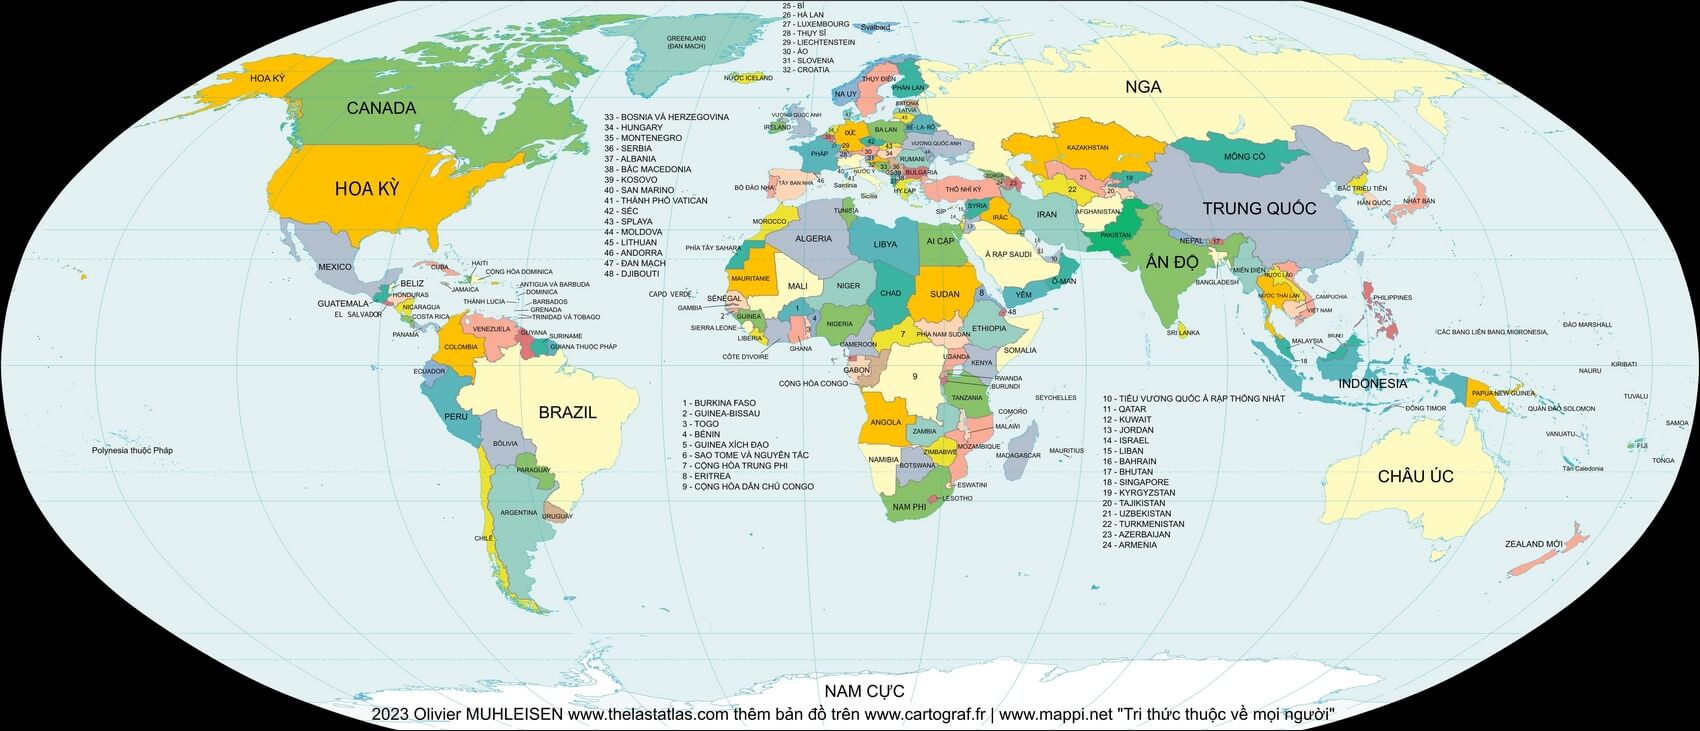 World map countries in Vietnamese